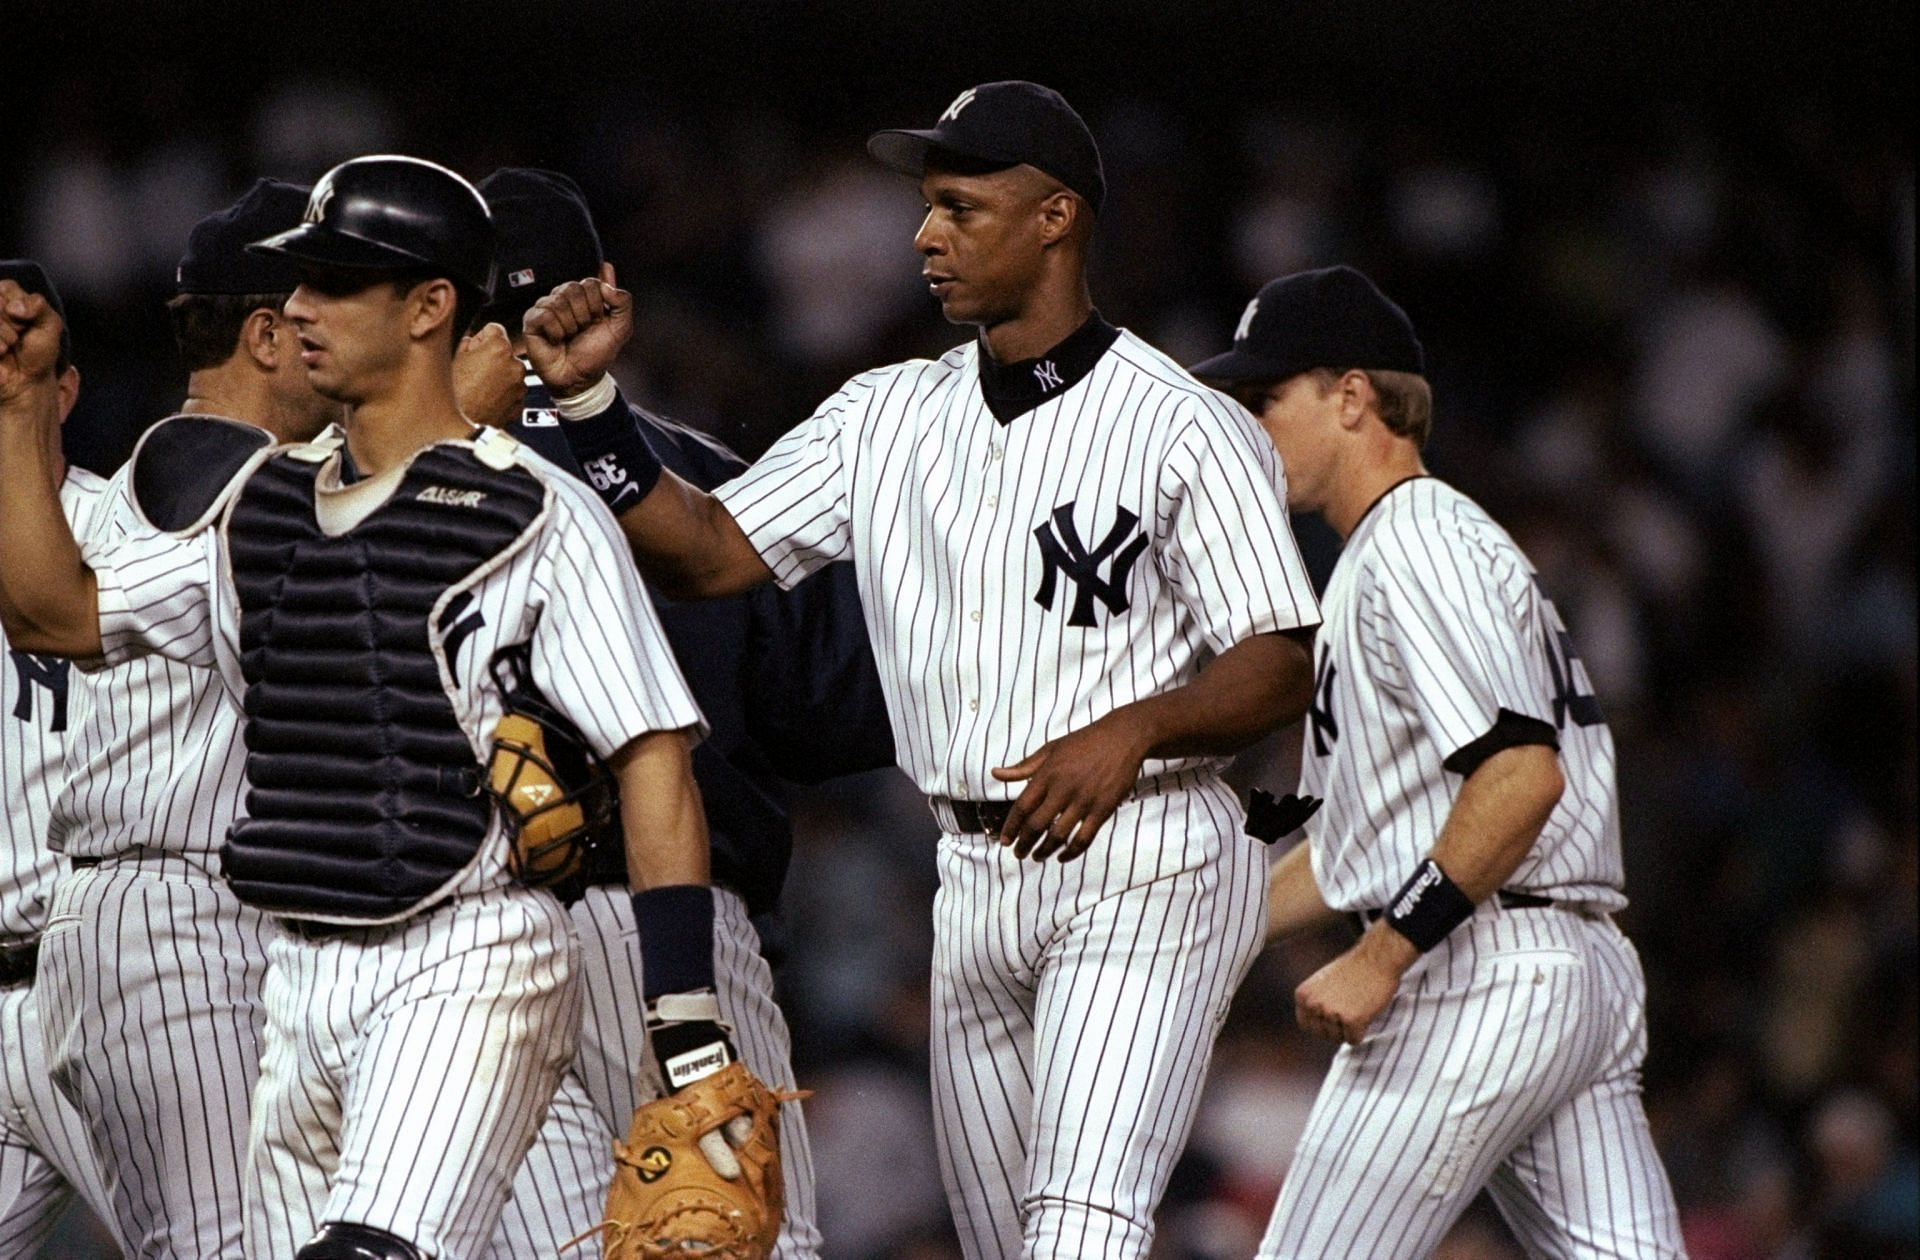 Darryl Strawberry: 28 May 1998: Darryl Strawberry #31 of the New York Yankees in action during a game against the Boston Red Sox at Yankee Stadium in Bronx, New York. The Yankees defeated the Red Sox 8-3. Mandatory Credit: Ezra C. Shaw /Allsport